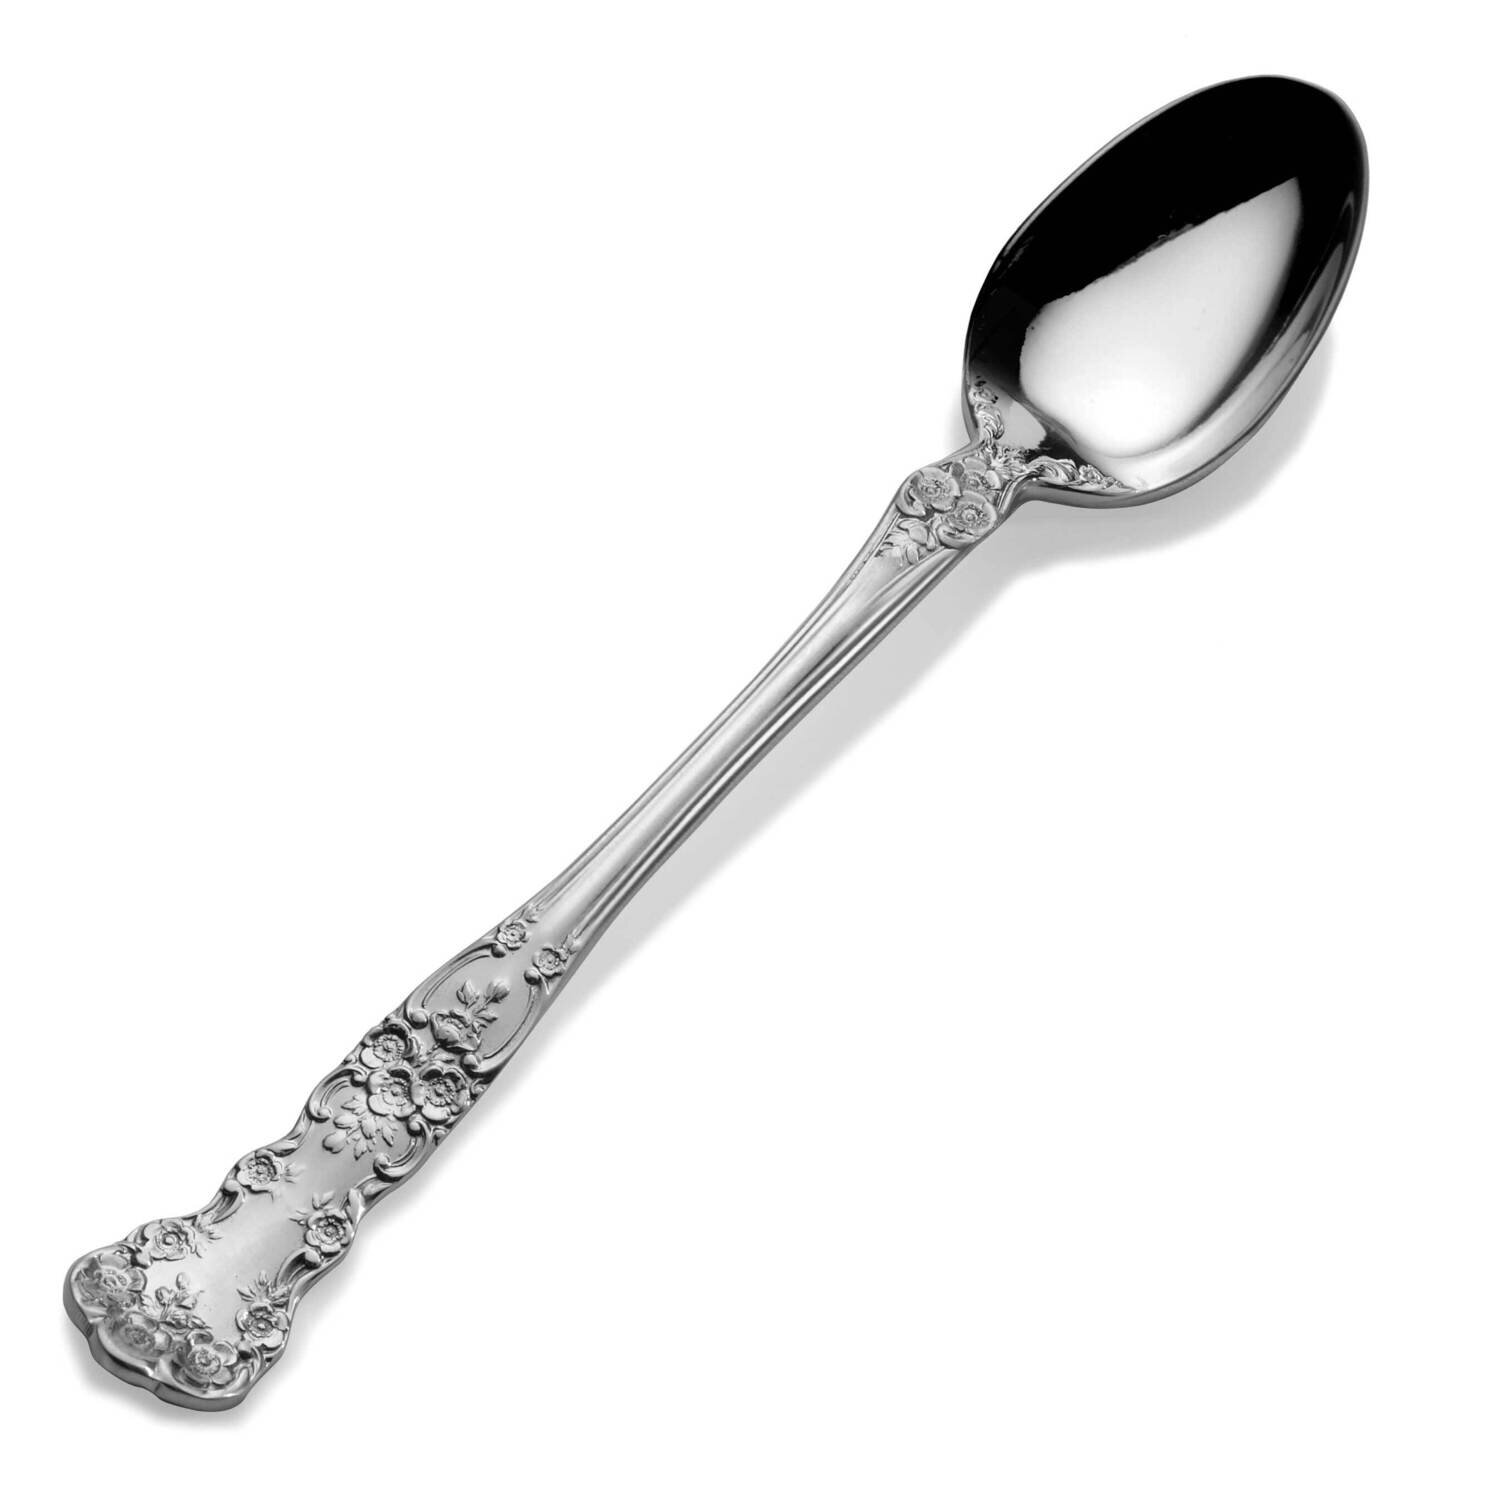 Gorham Buttercup Baby Spoon Sterling Silver GM19839